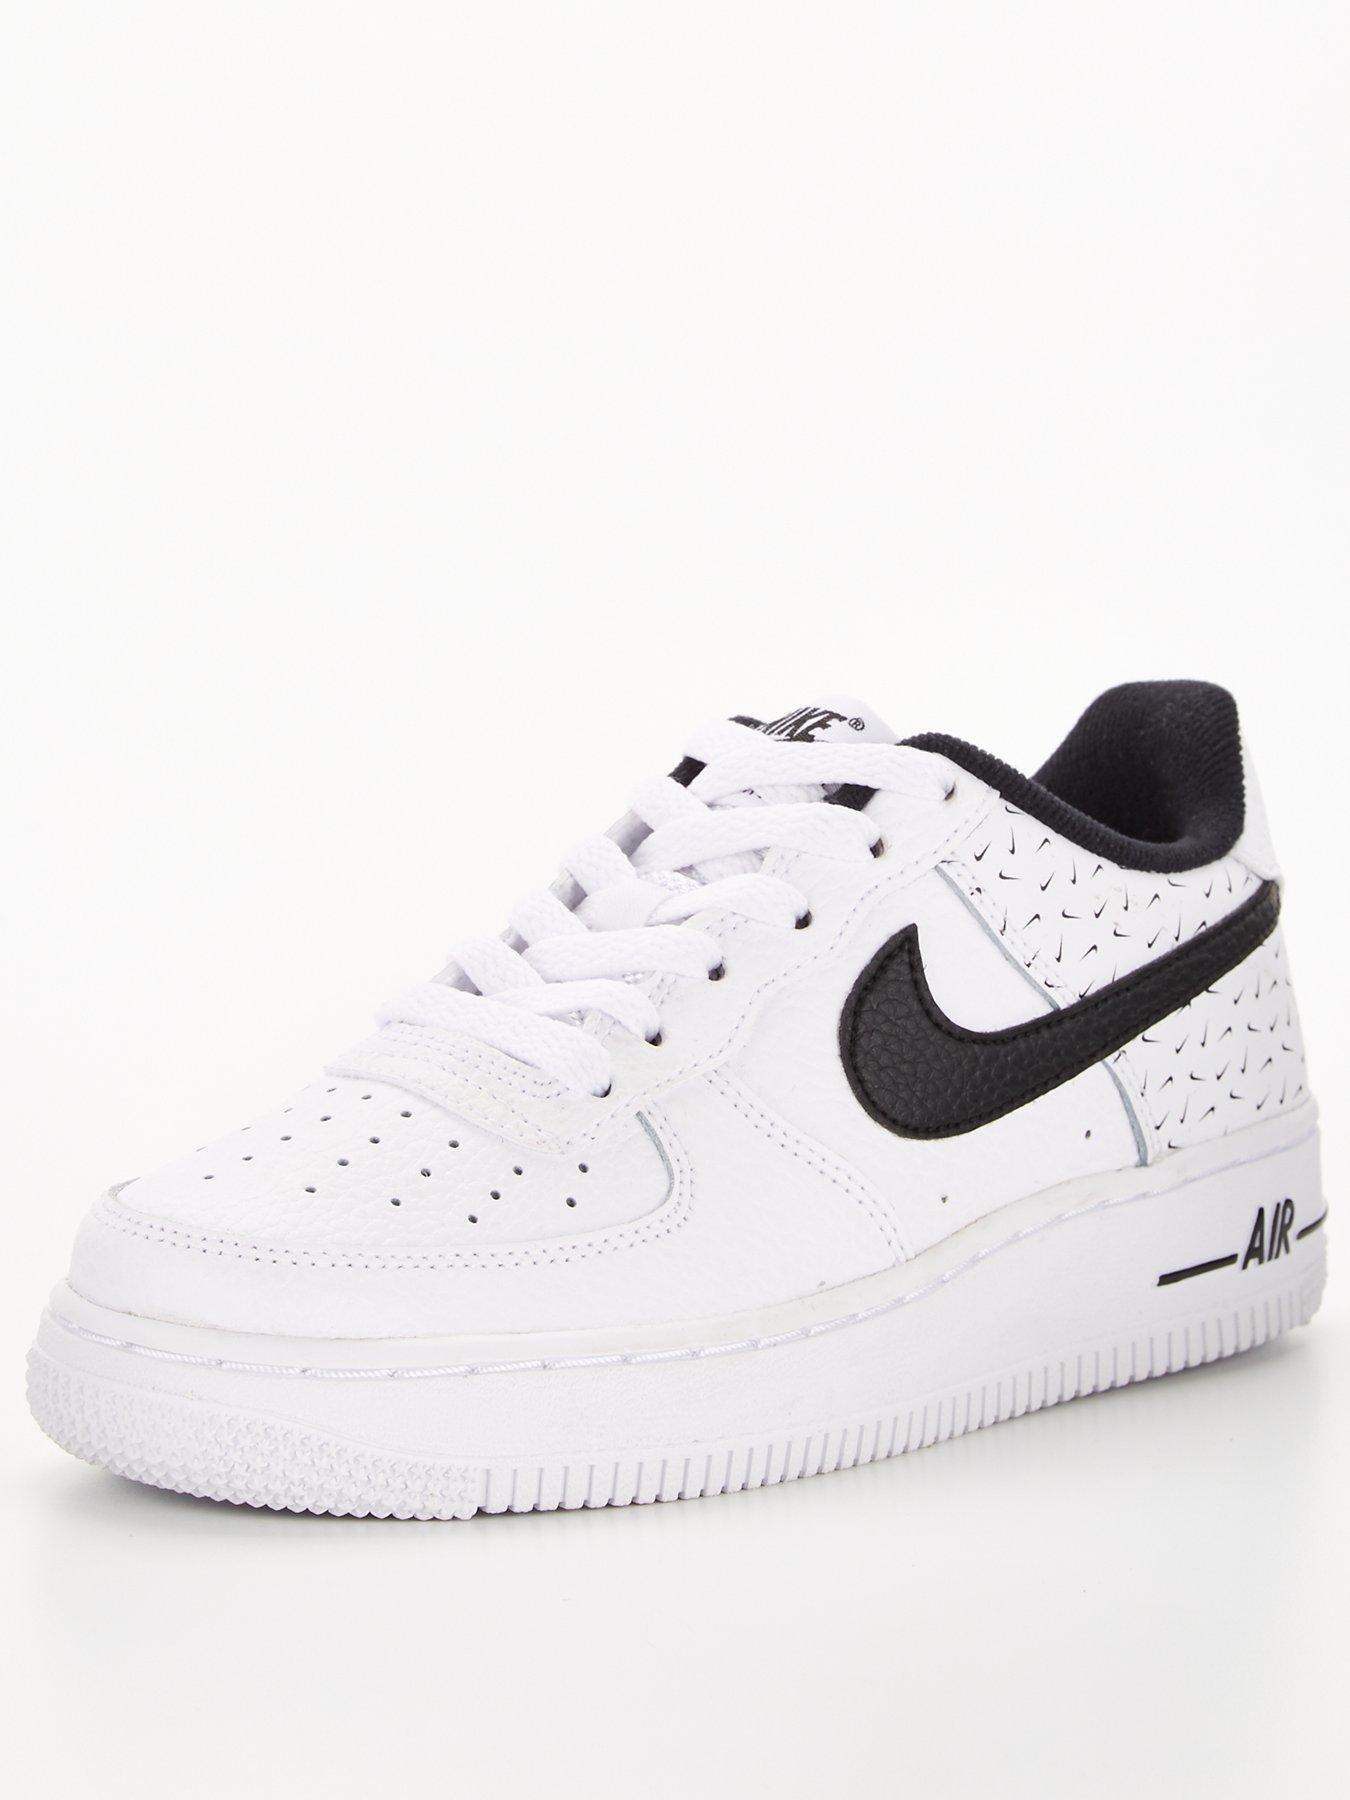 nike air force 1 white junior size 3